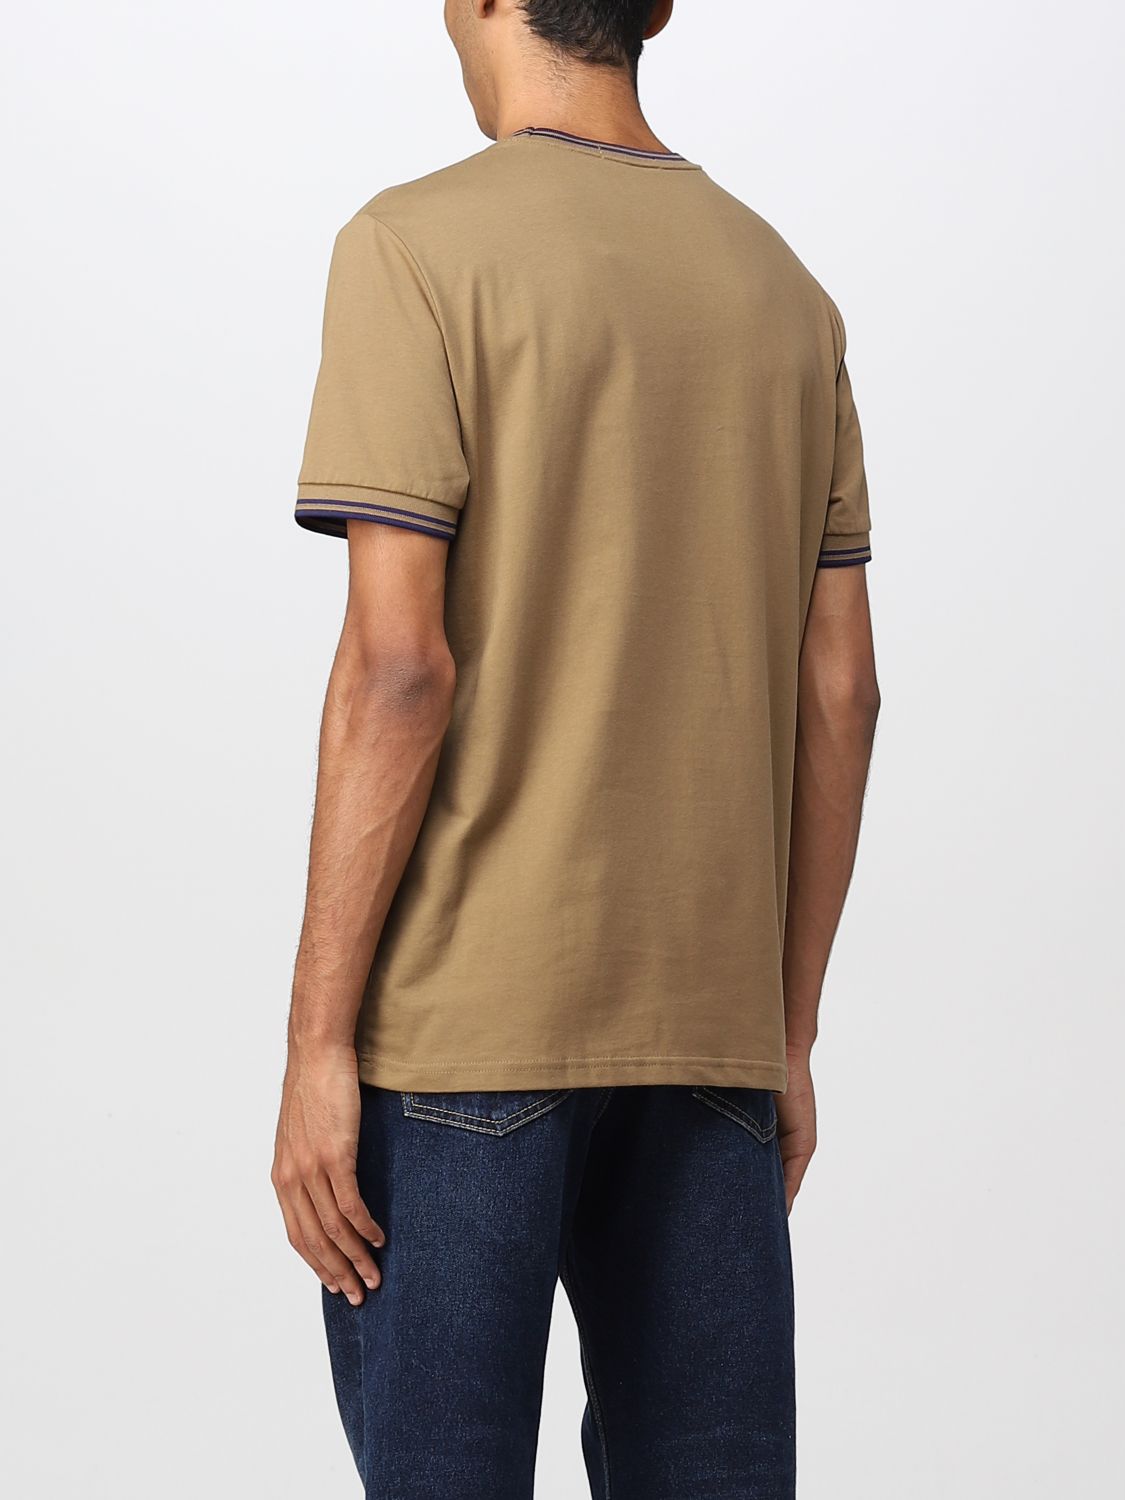 Tシャツ Fred Perry: Tシャツ Fred Perry メンズ ブラウン 2